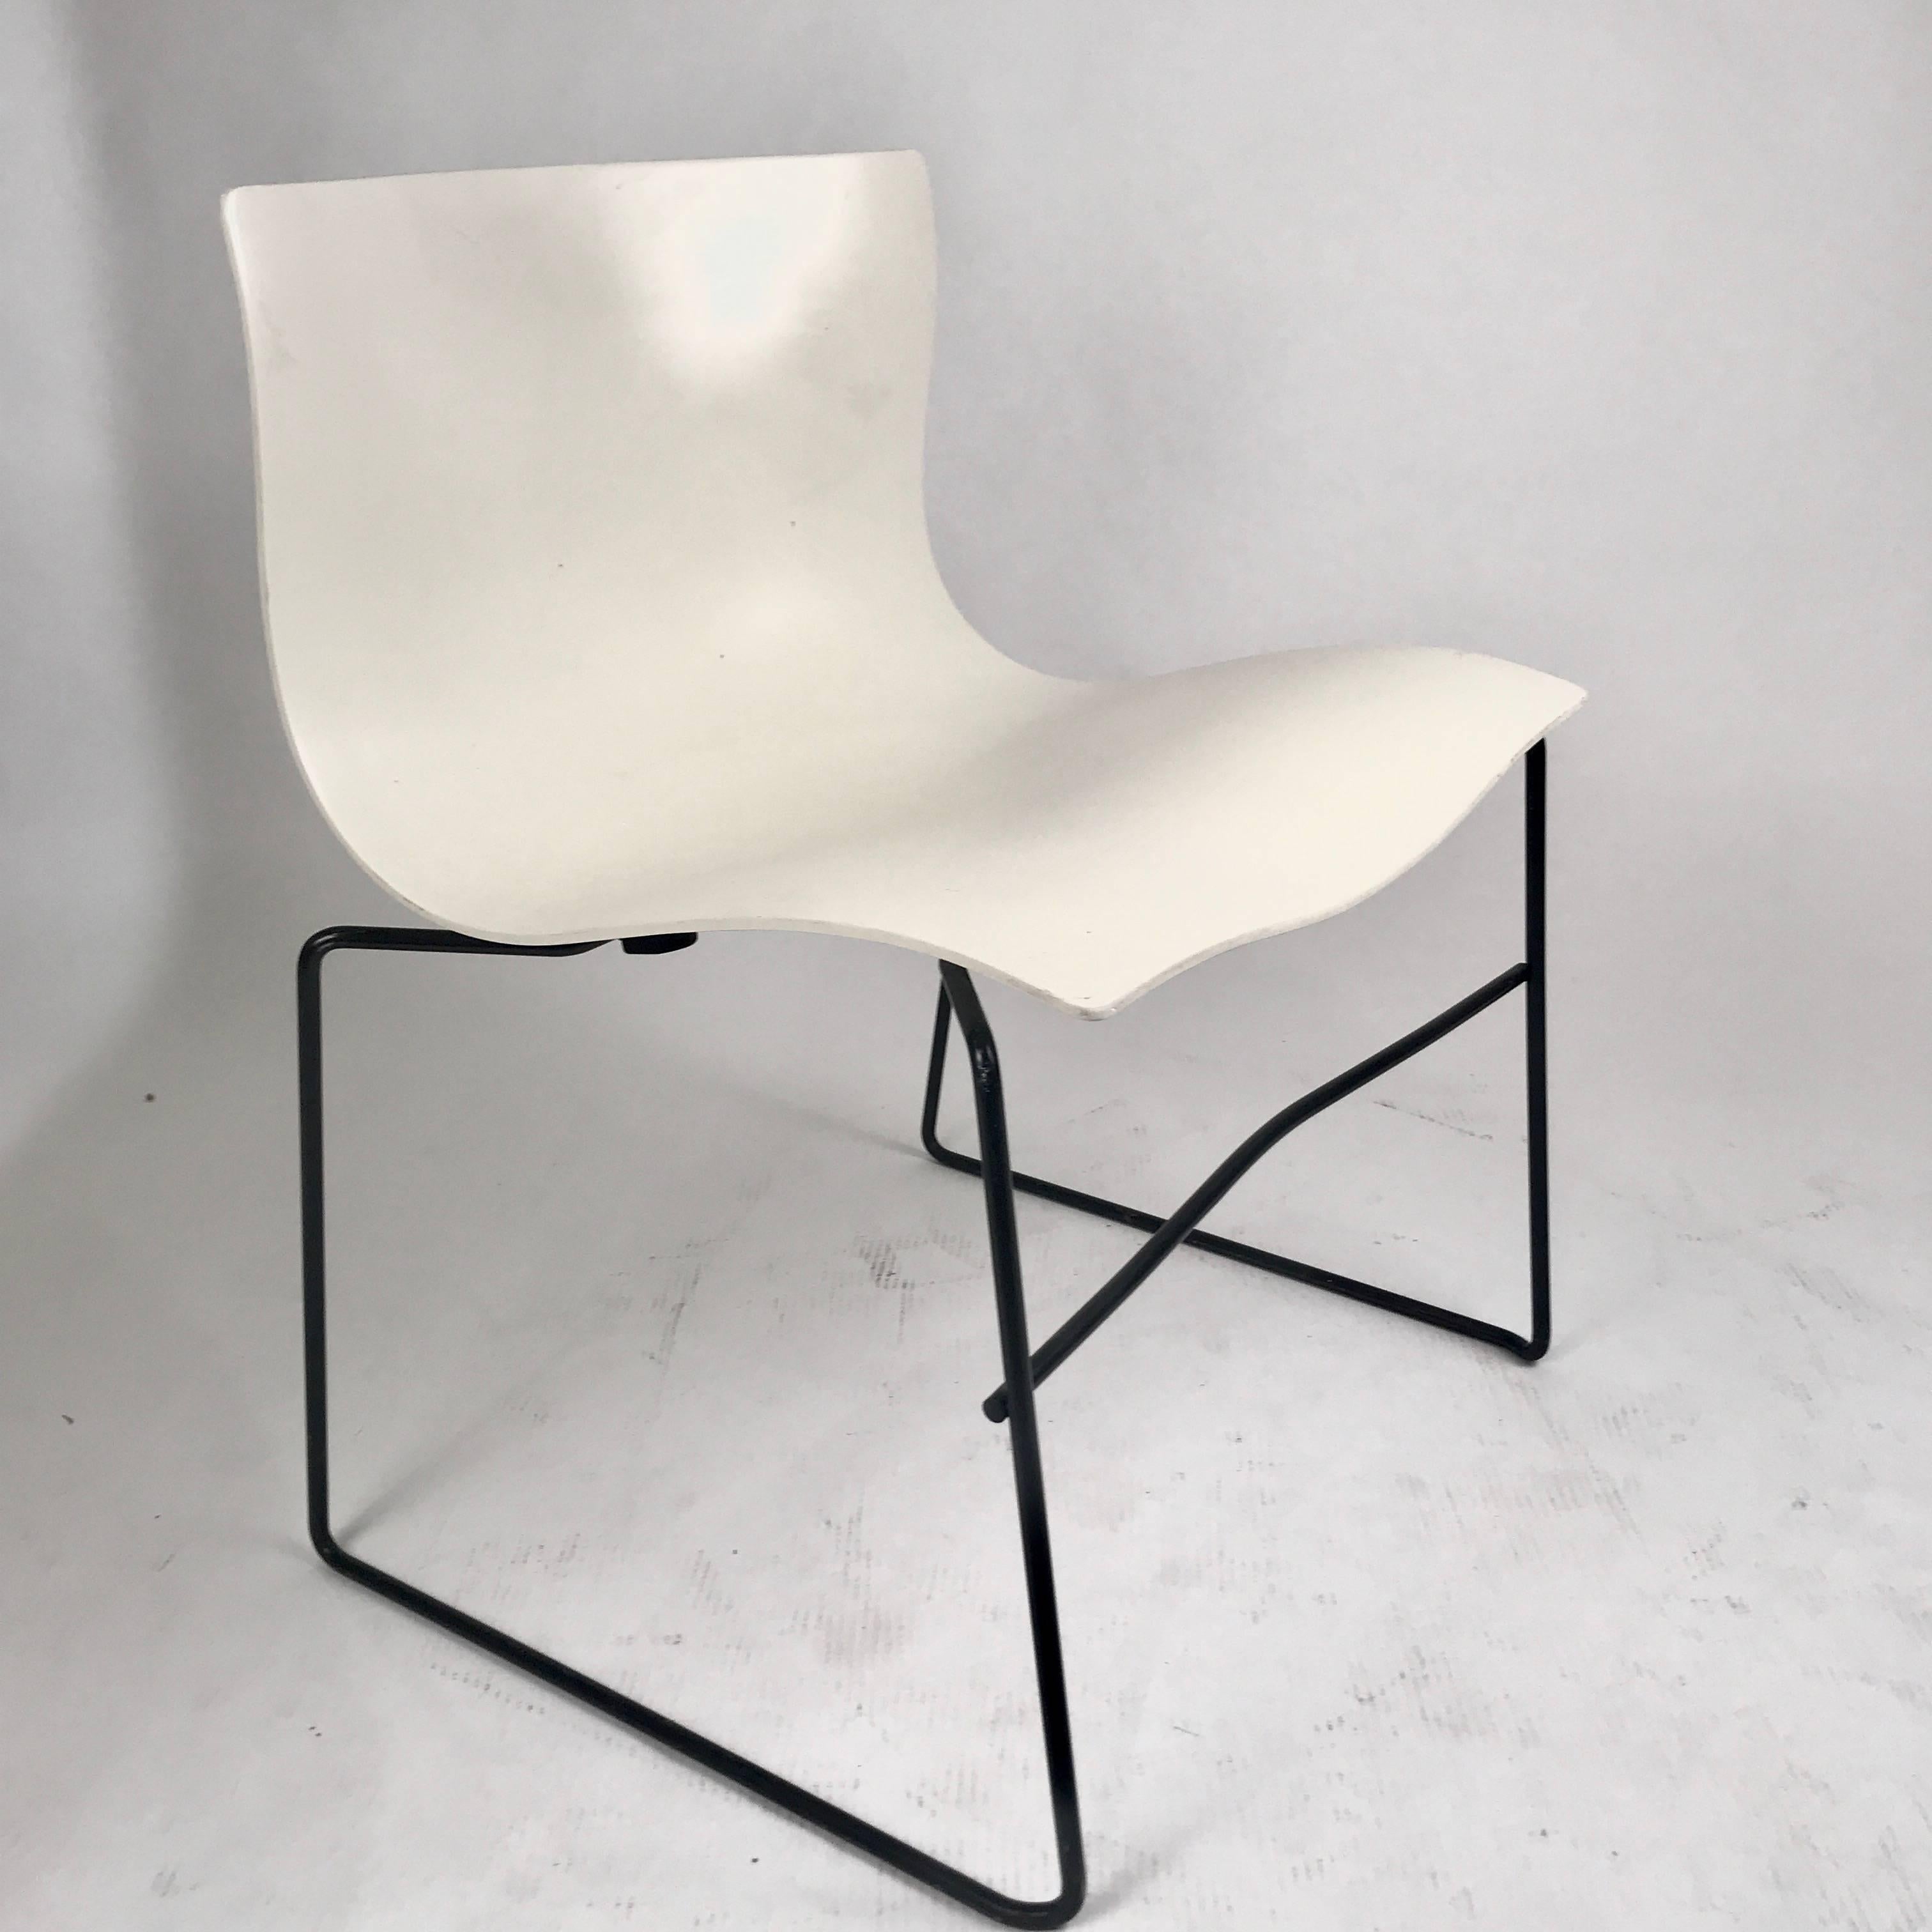 45 available stacking indoors /outdoors Knoll Vignelli handkerchief chairs in white with black wrought iron frame. Intended to evoke the windblown contours of a handkerchief blowing through the air, the generously scaled chair is practical and